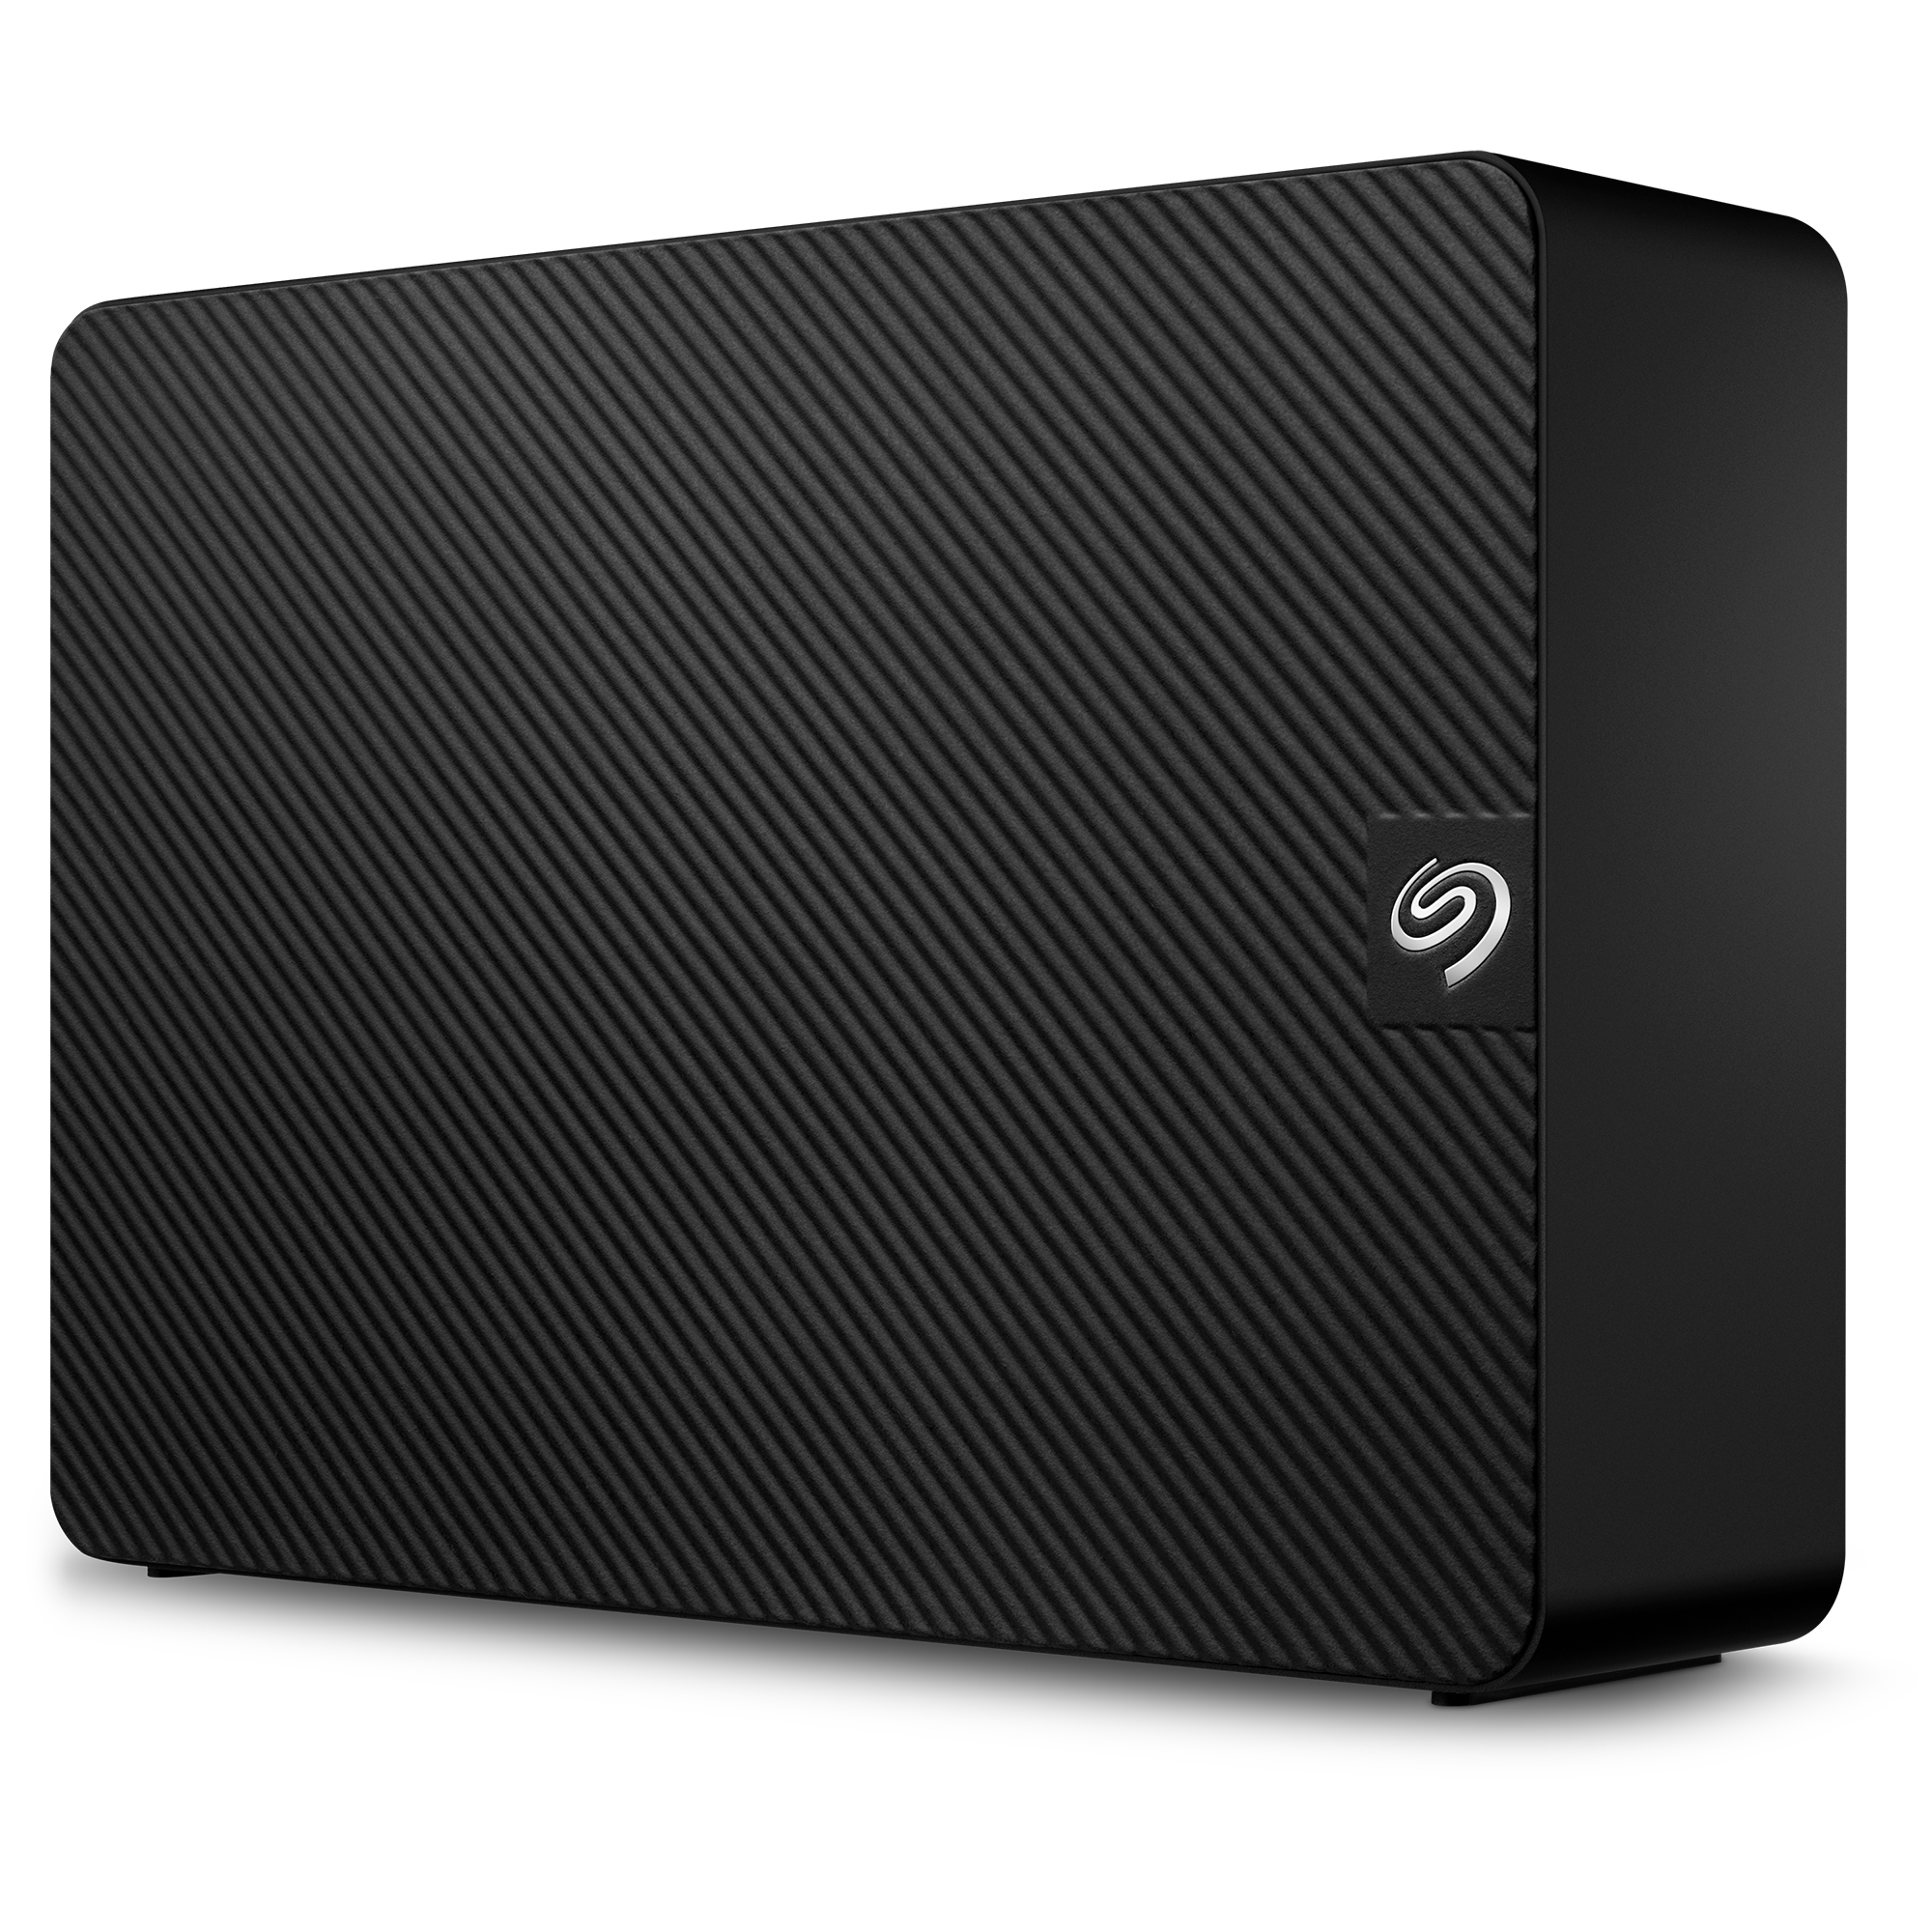 Seagate Expansion 18TB External USB 3.0 Hard Drive with Resue Data Recovery Services - Black (STKP18000400) - image 1 of 7